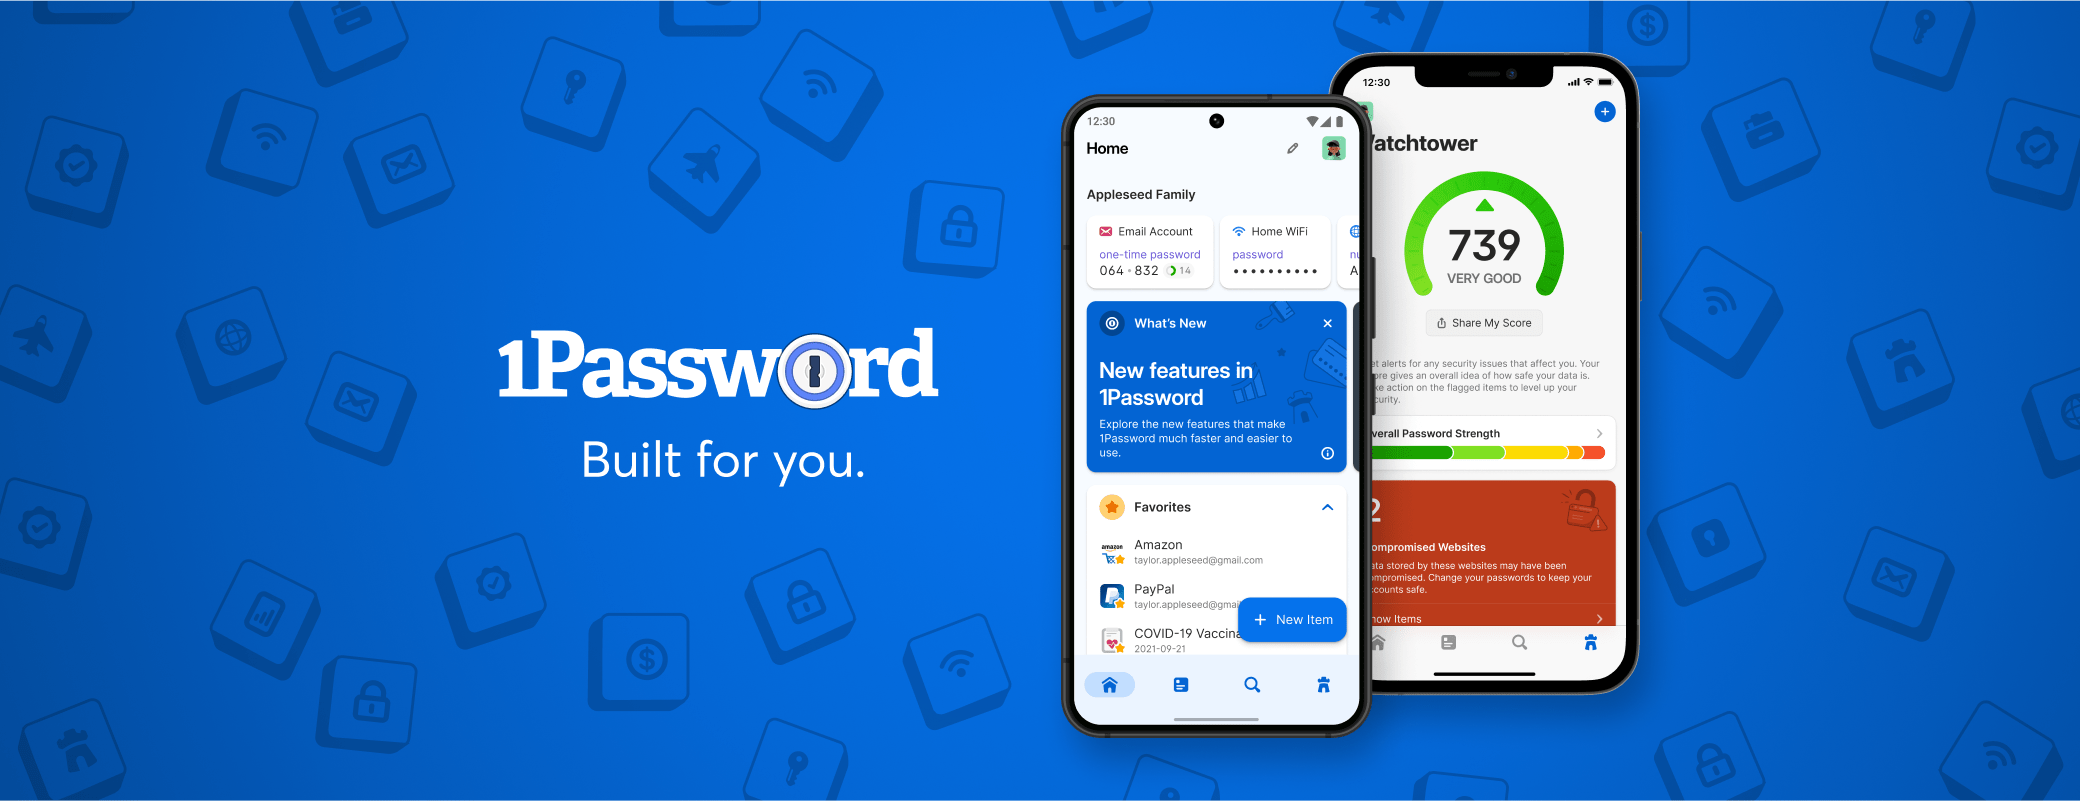 1Password 8 Beta for Android